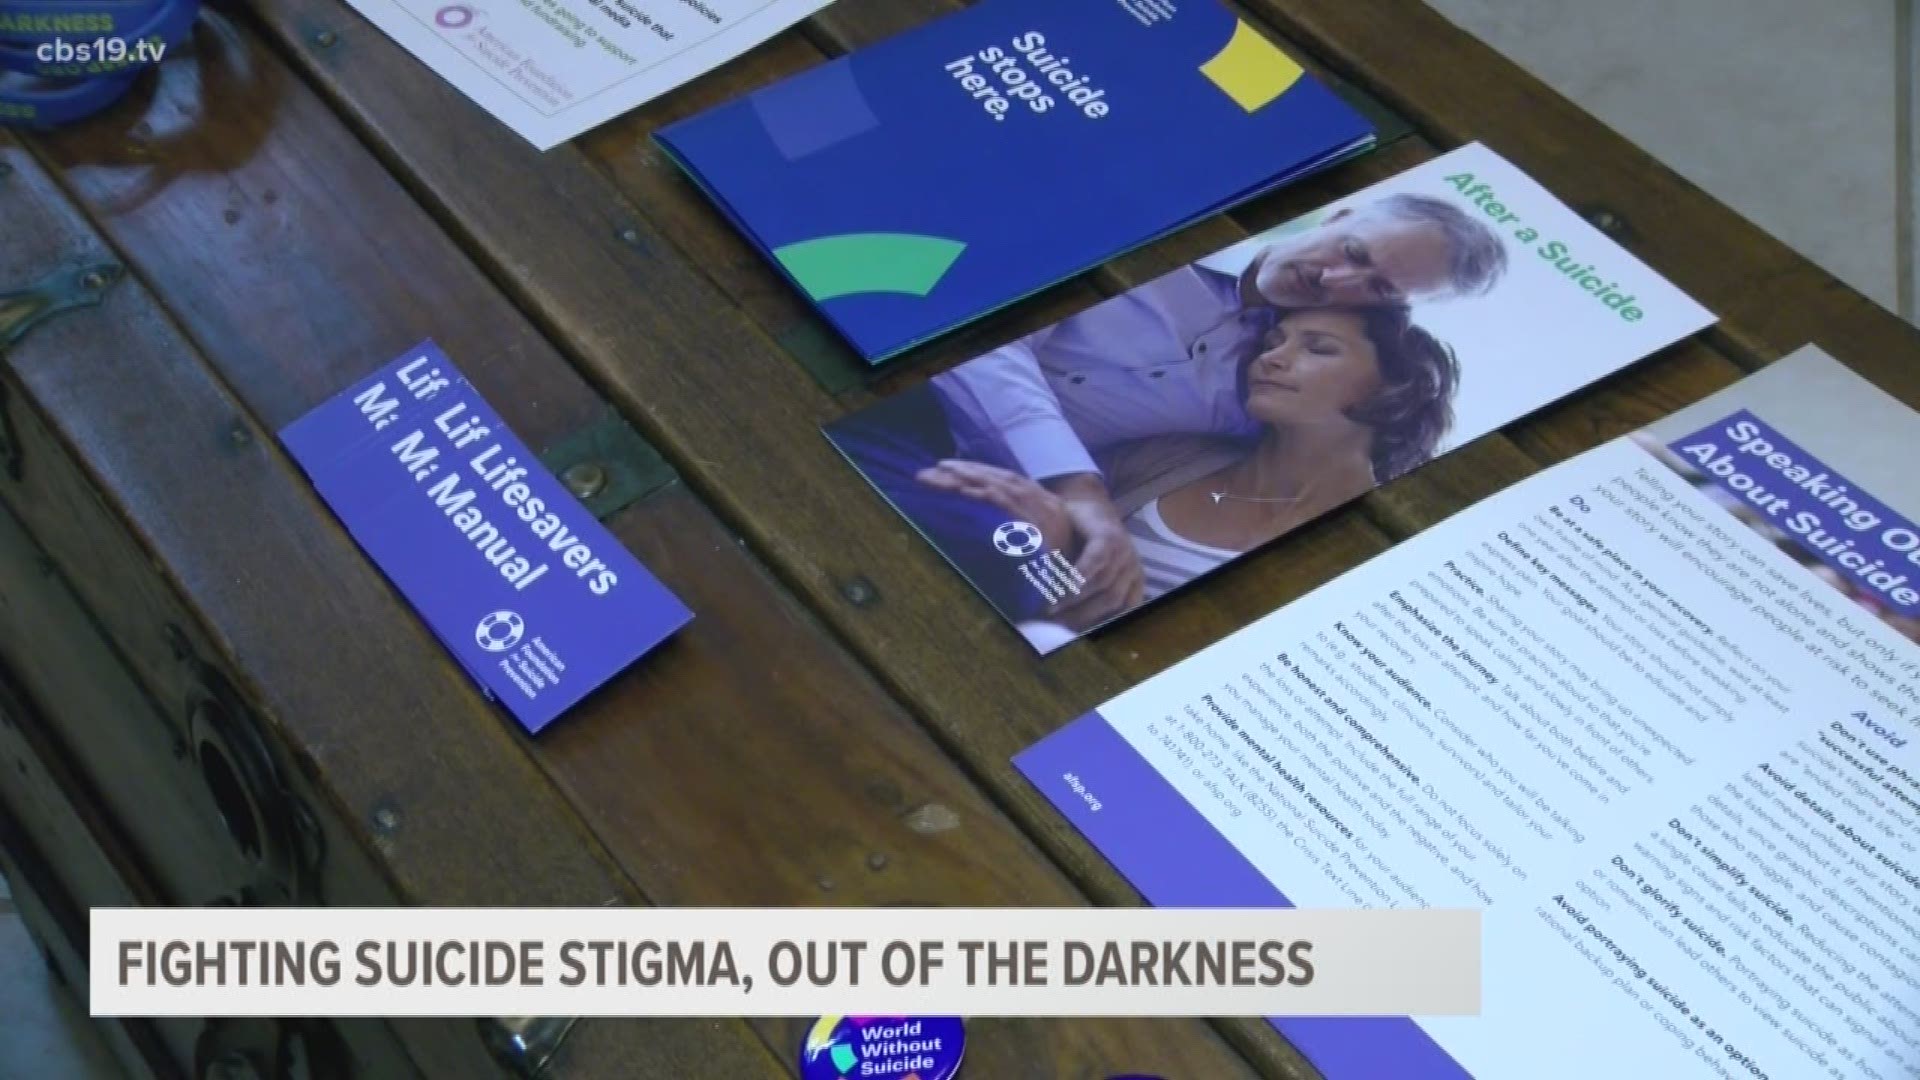 Ladyrian Cole talks about 'Out of the Darkness' a suicide prevention and awareness program.